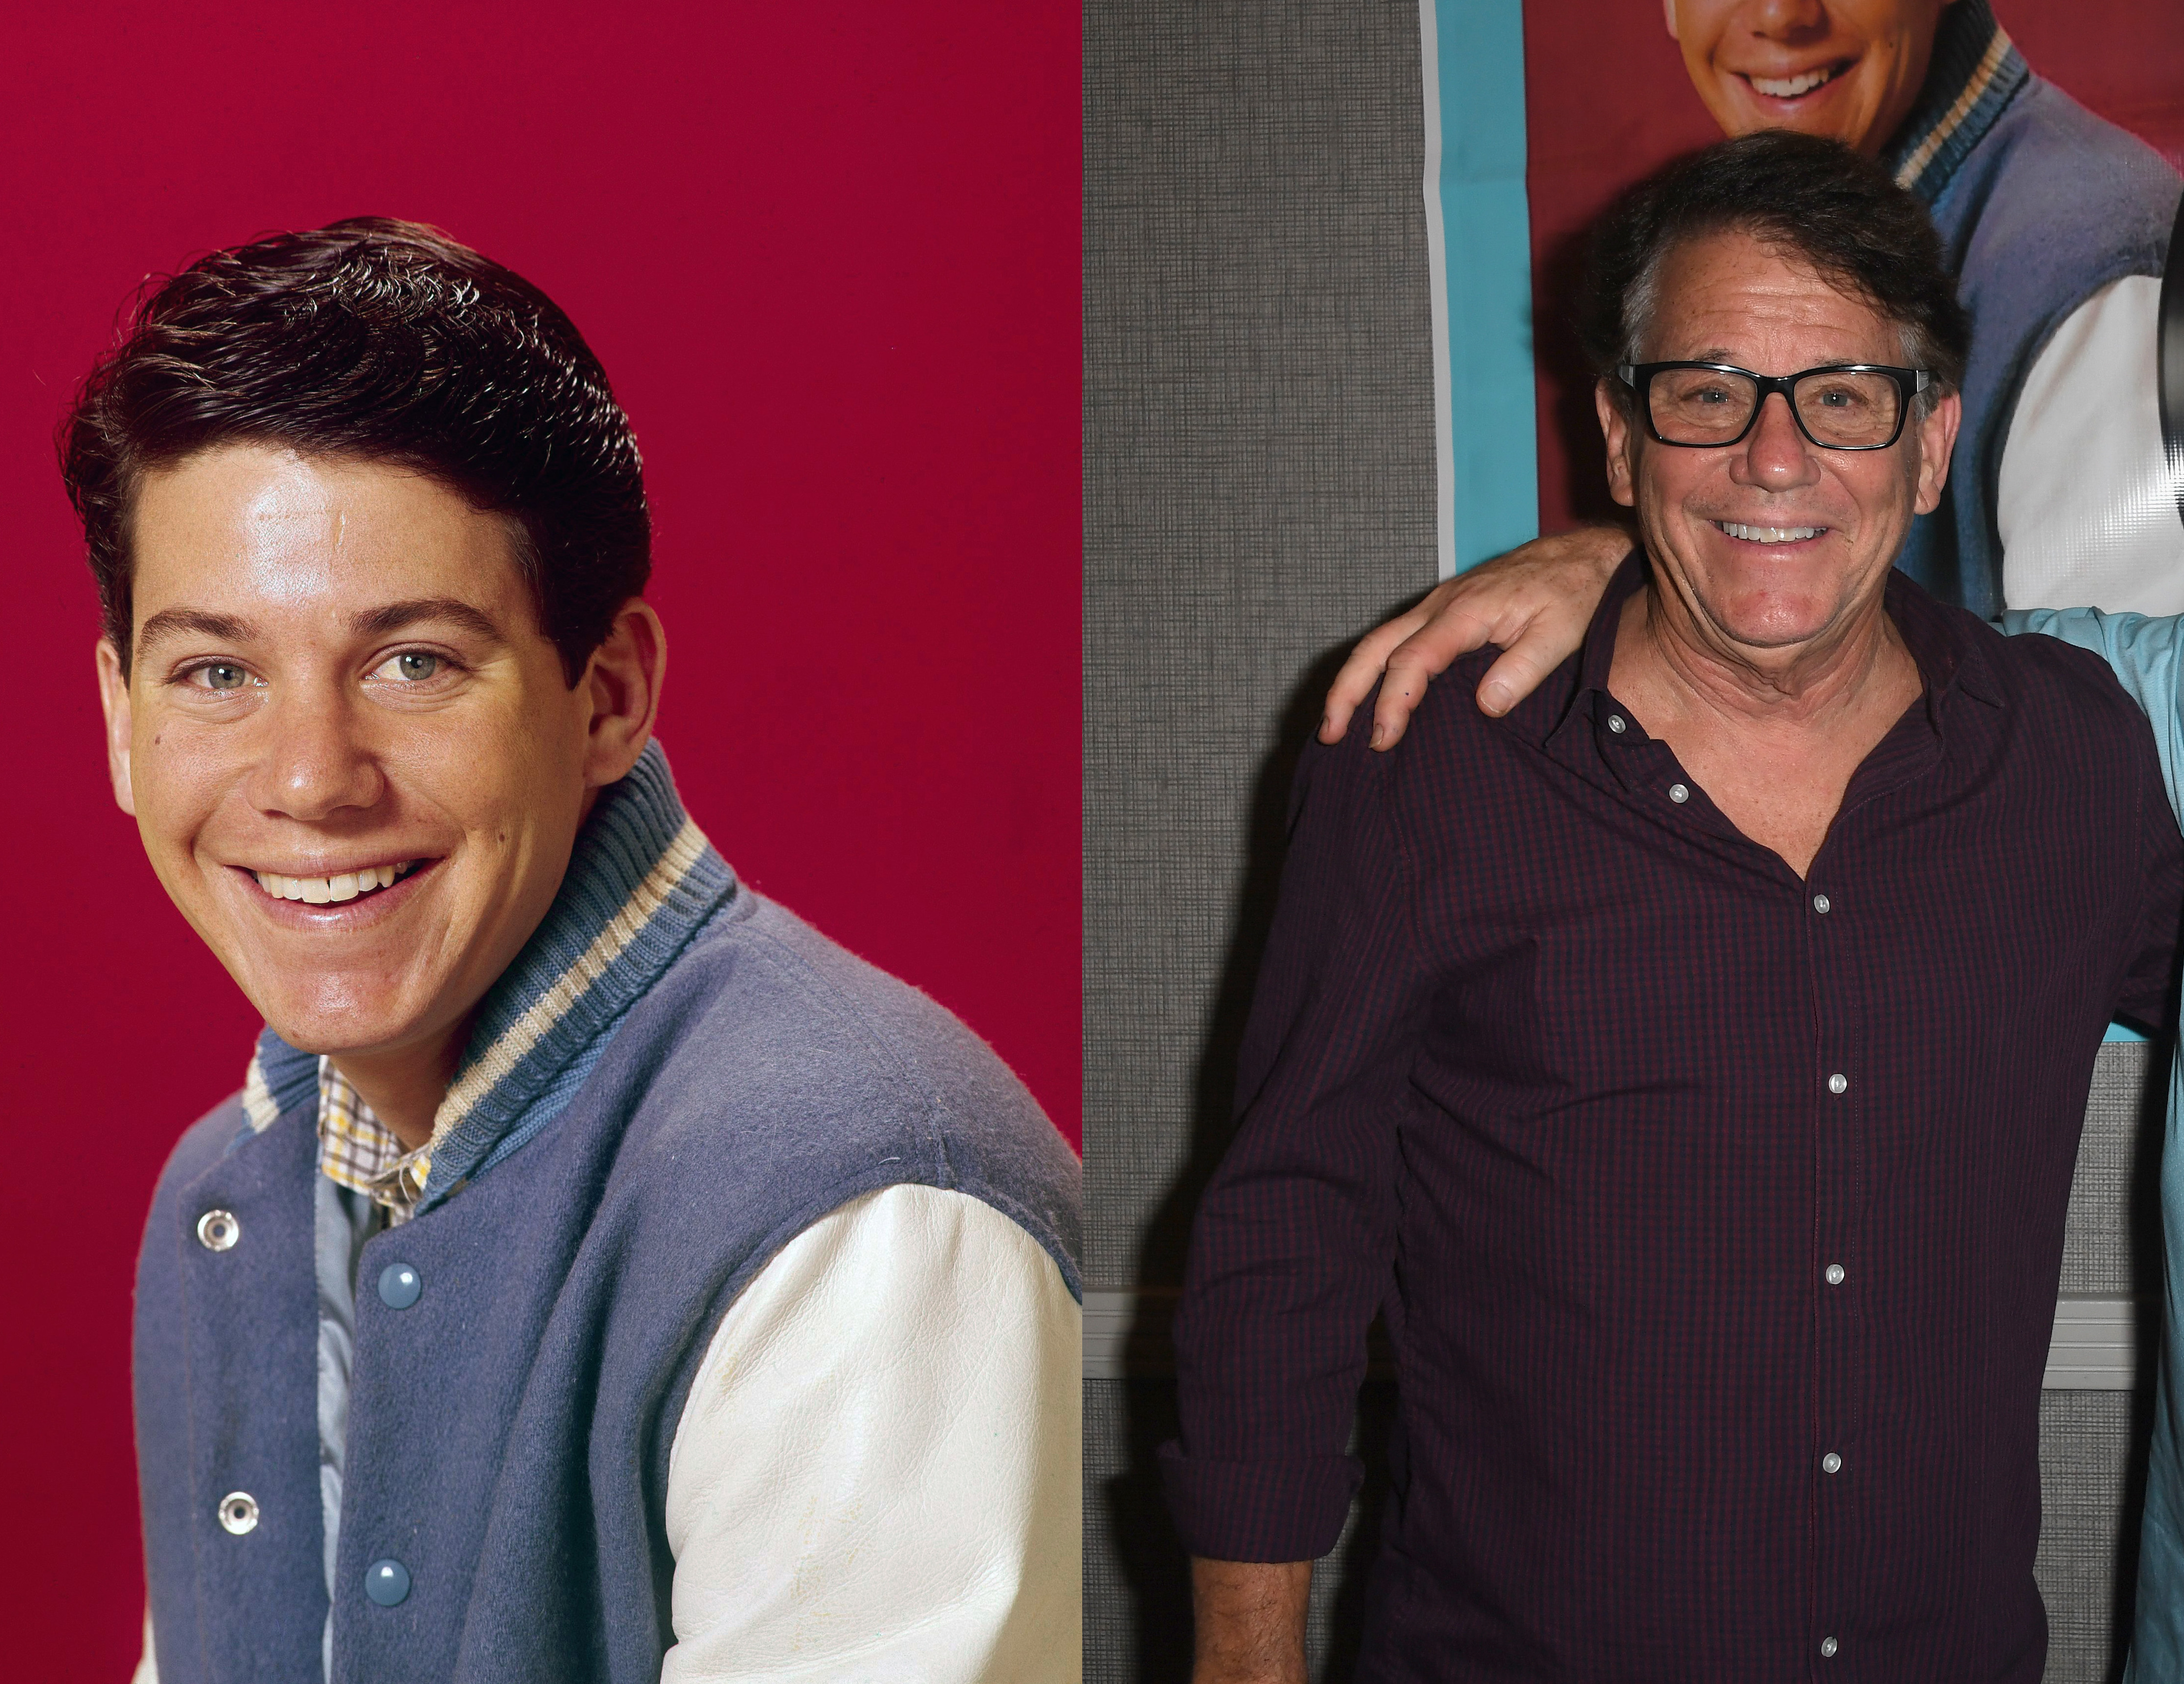 Anson Williams as Potsie Weber in "Happy Days," circa 1974 | Anson Williams attends The Hollywood Show held at Los Angeles Marriott Burbank Airport on July 2, 2022 in Burbank, California. | Source: Getty Images